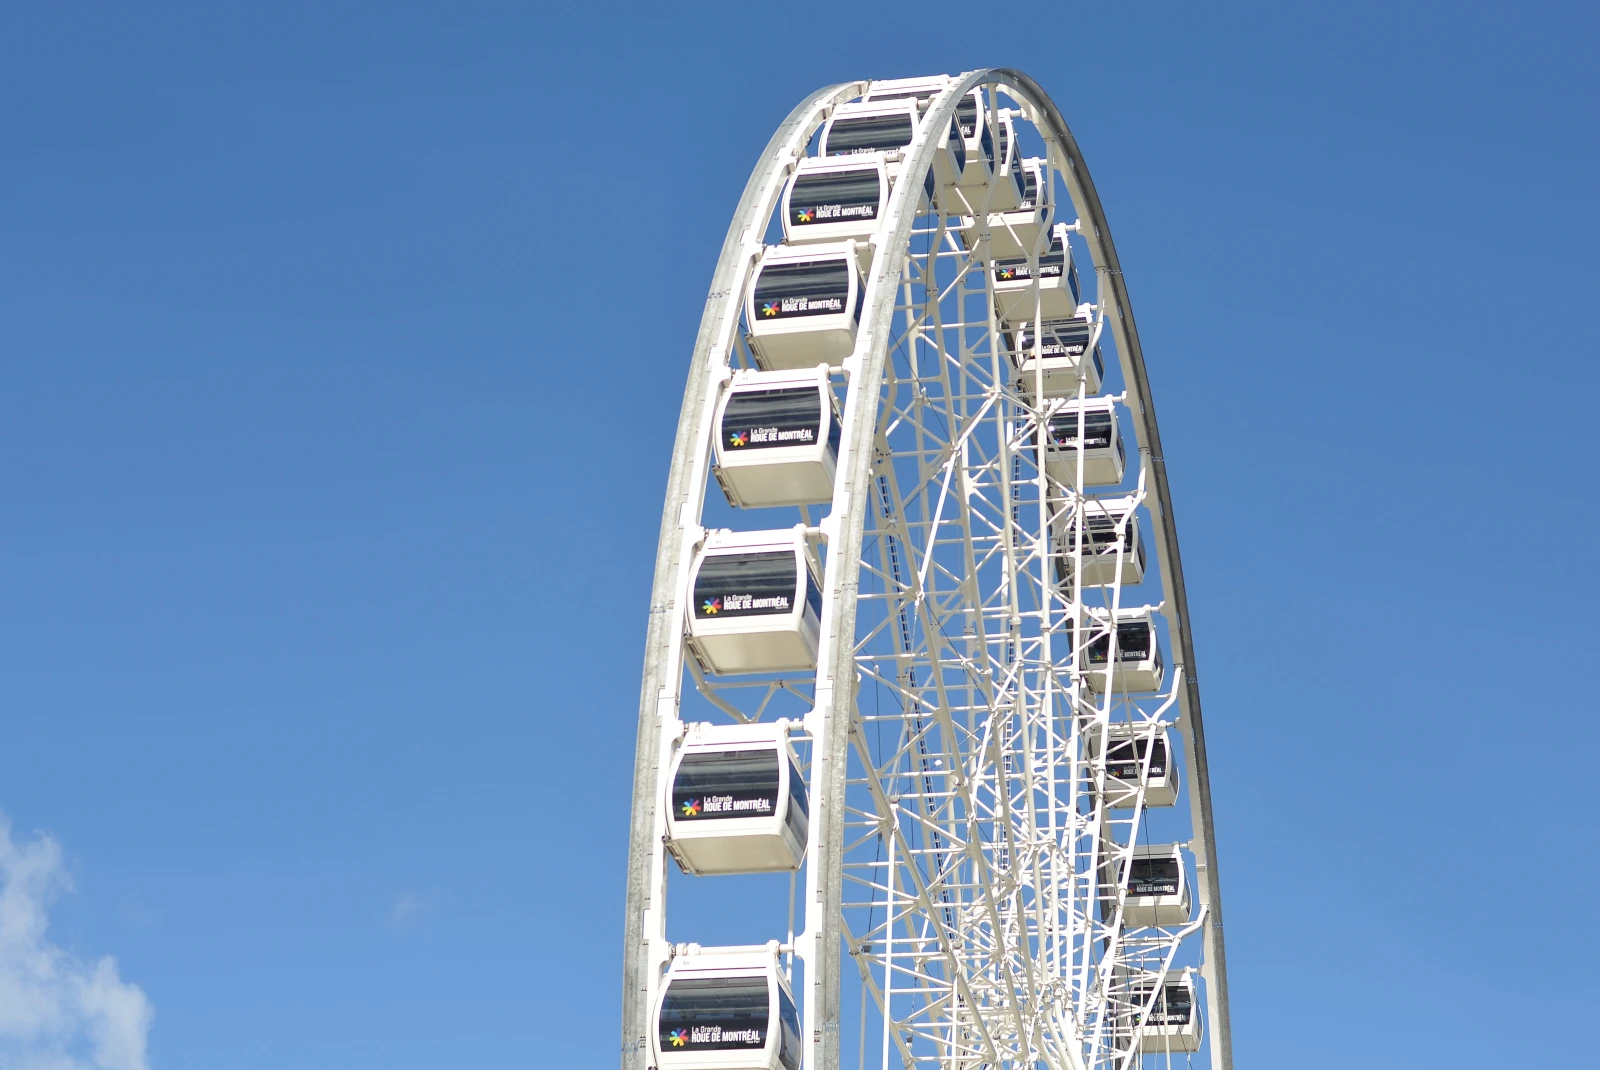 Giant white ferris wheel with dozens of cars with black windows along the double sides wheel with a blue sky backdrop